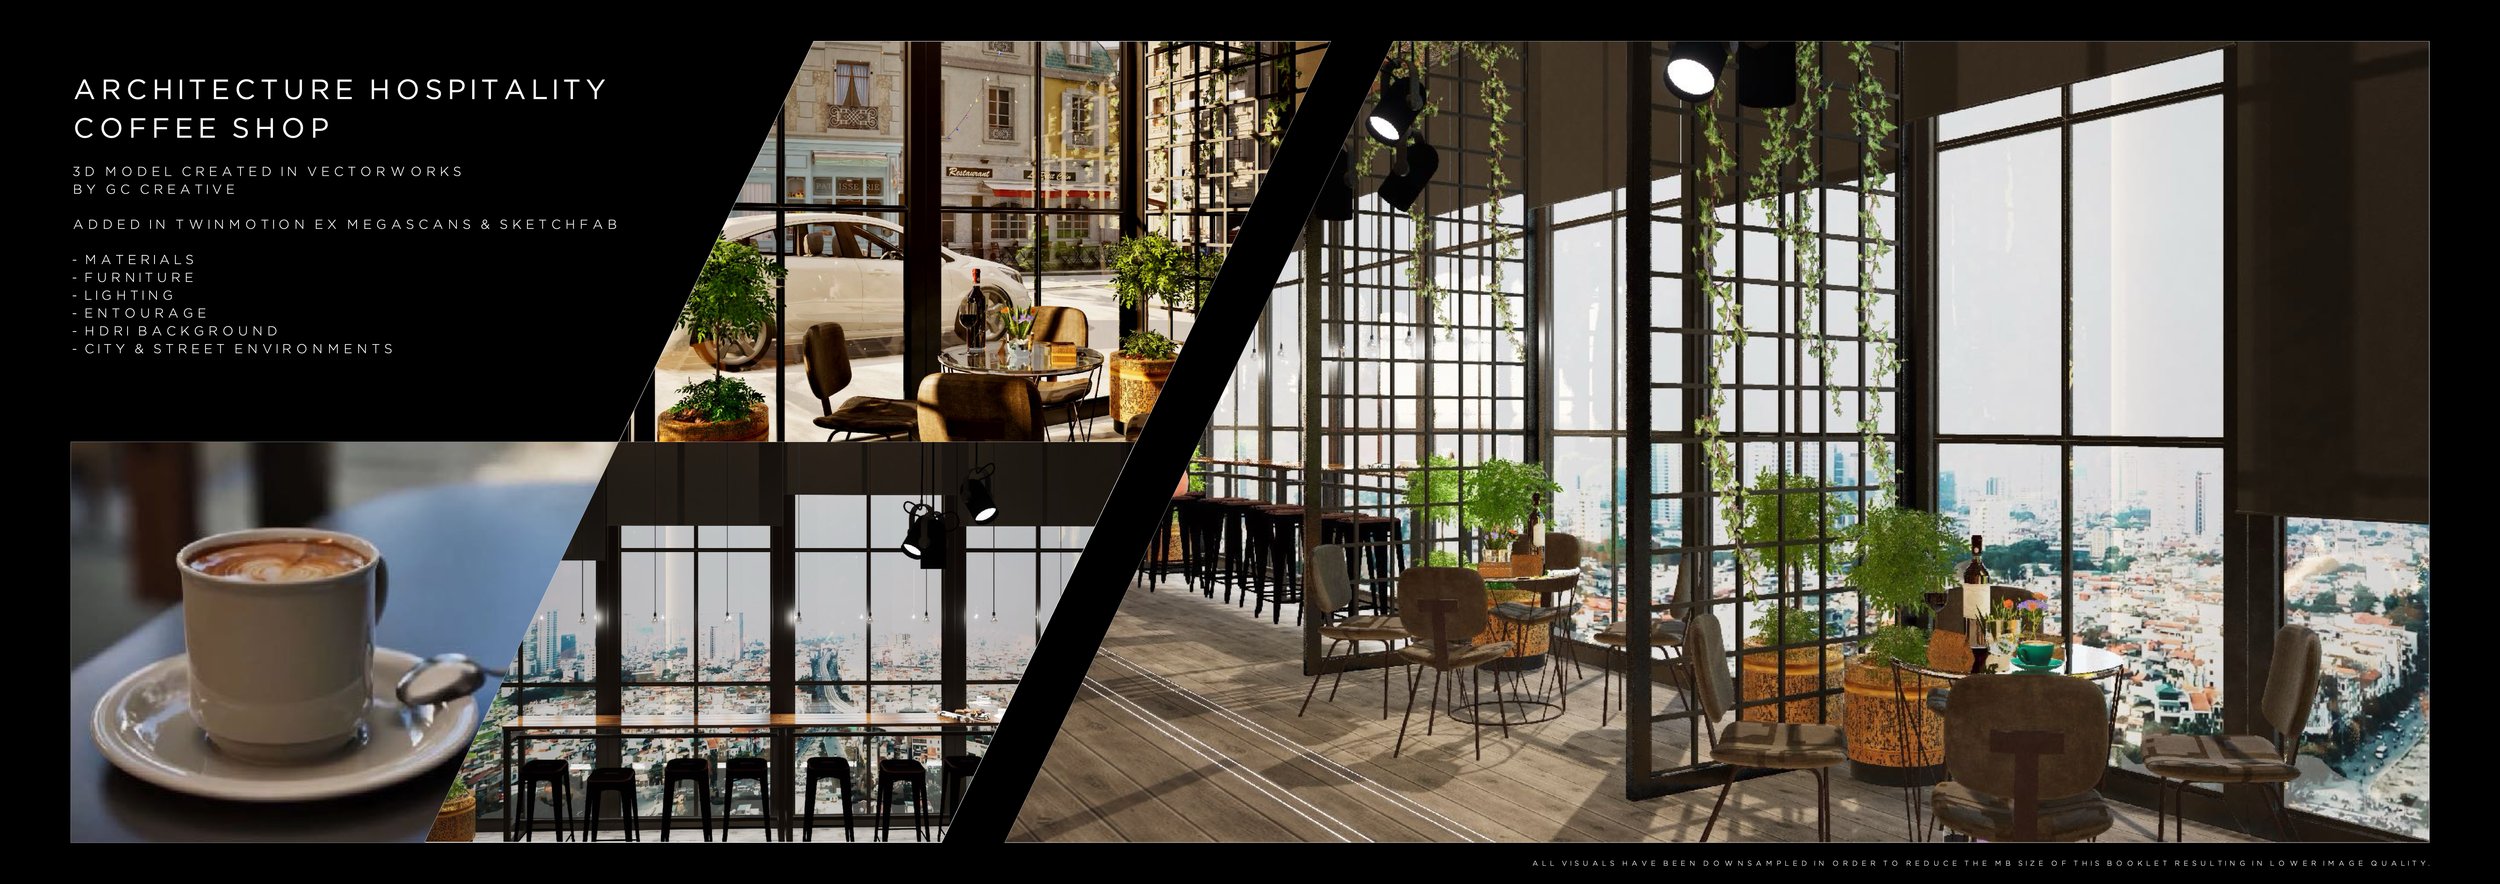 Grethe+Connerth+Twinmotion+Vectorworks+Real Time Visualisations+3D Model+Archviz+Trade+Show+Displays+Expo+Booth+Exhibition+Display+Design+Expo+Booth+Gallery+Museum+Retail+Brand+Academy+Commercial+Event+Environment+HOSPITALITY+COFFEE SHOP.JPG